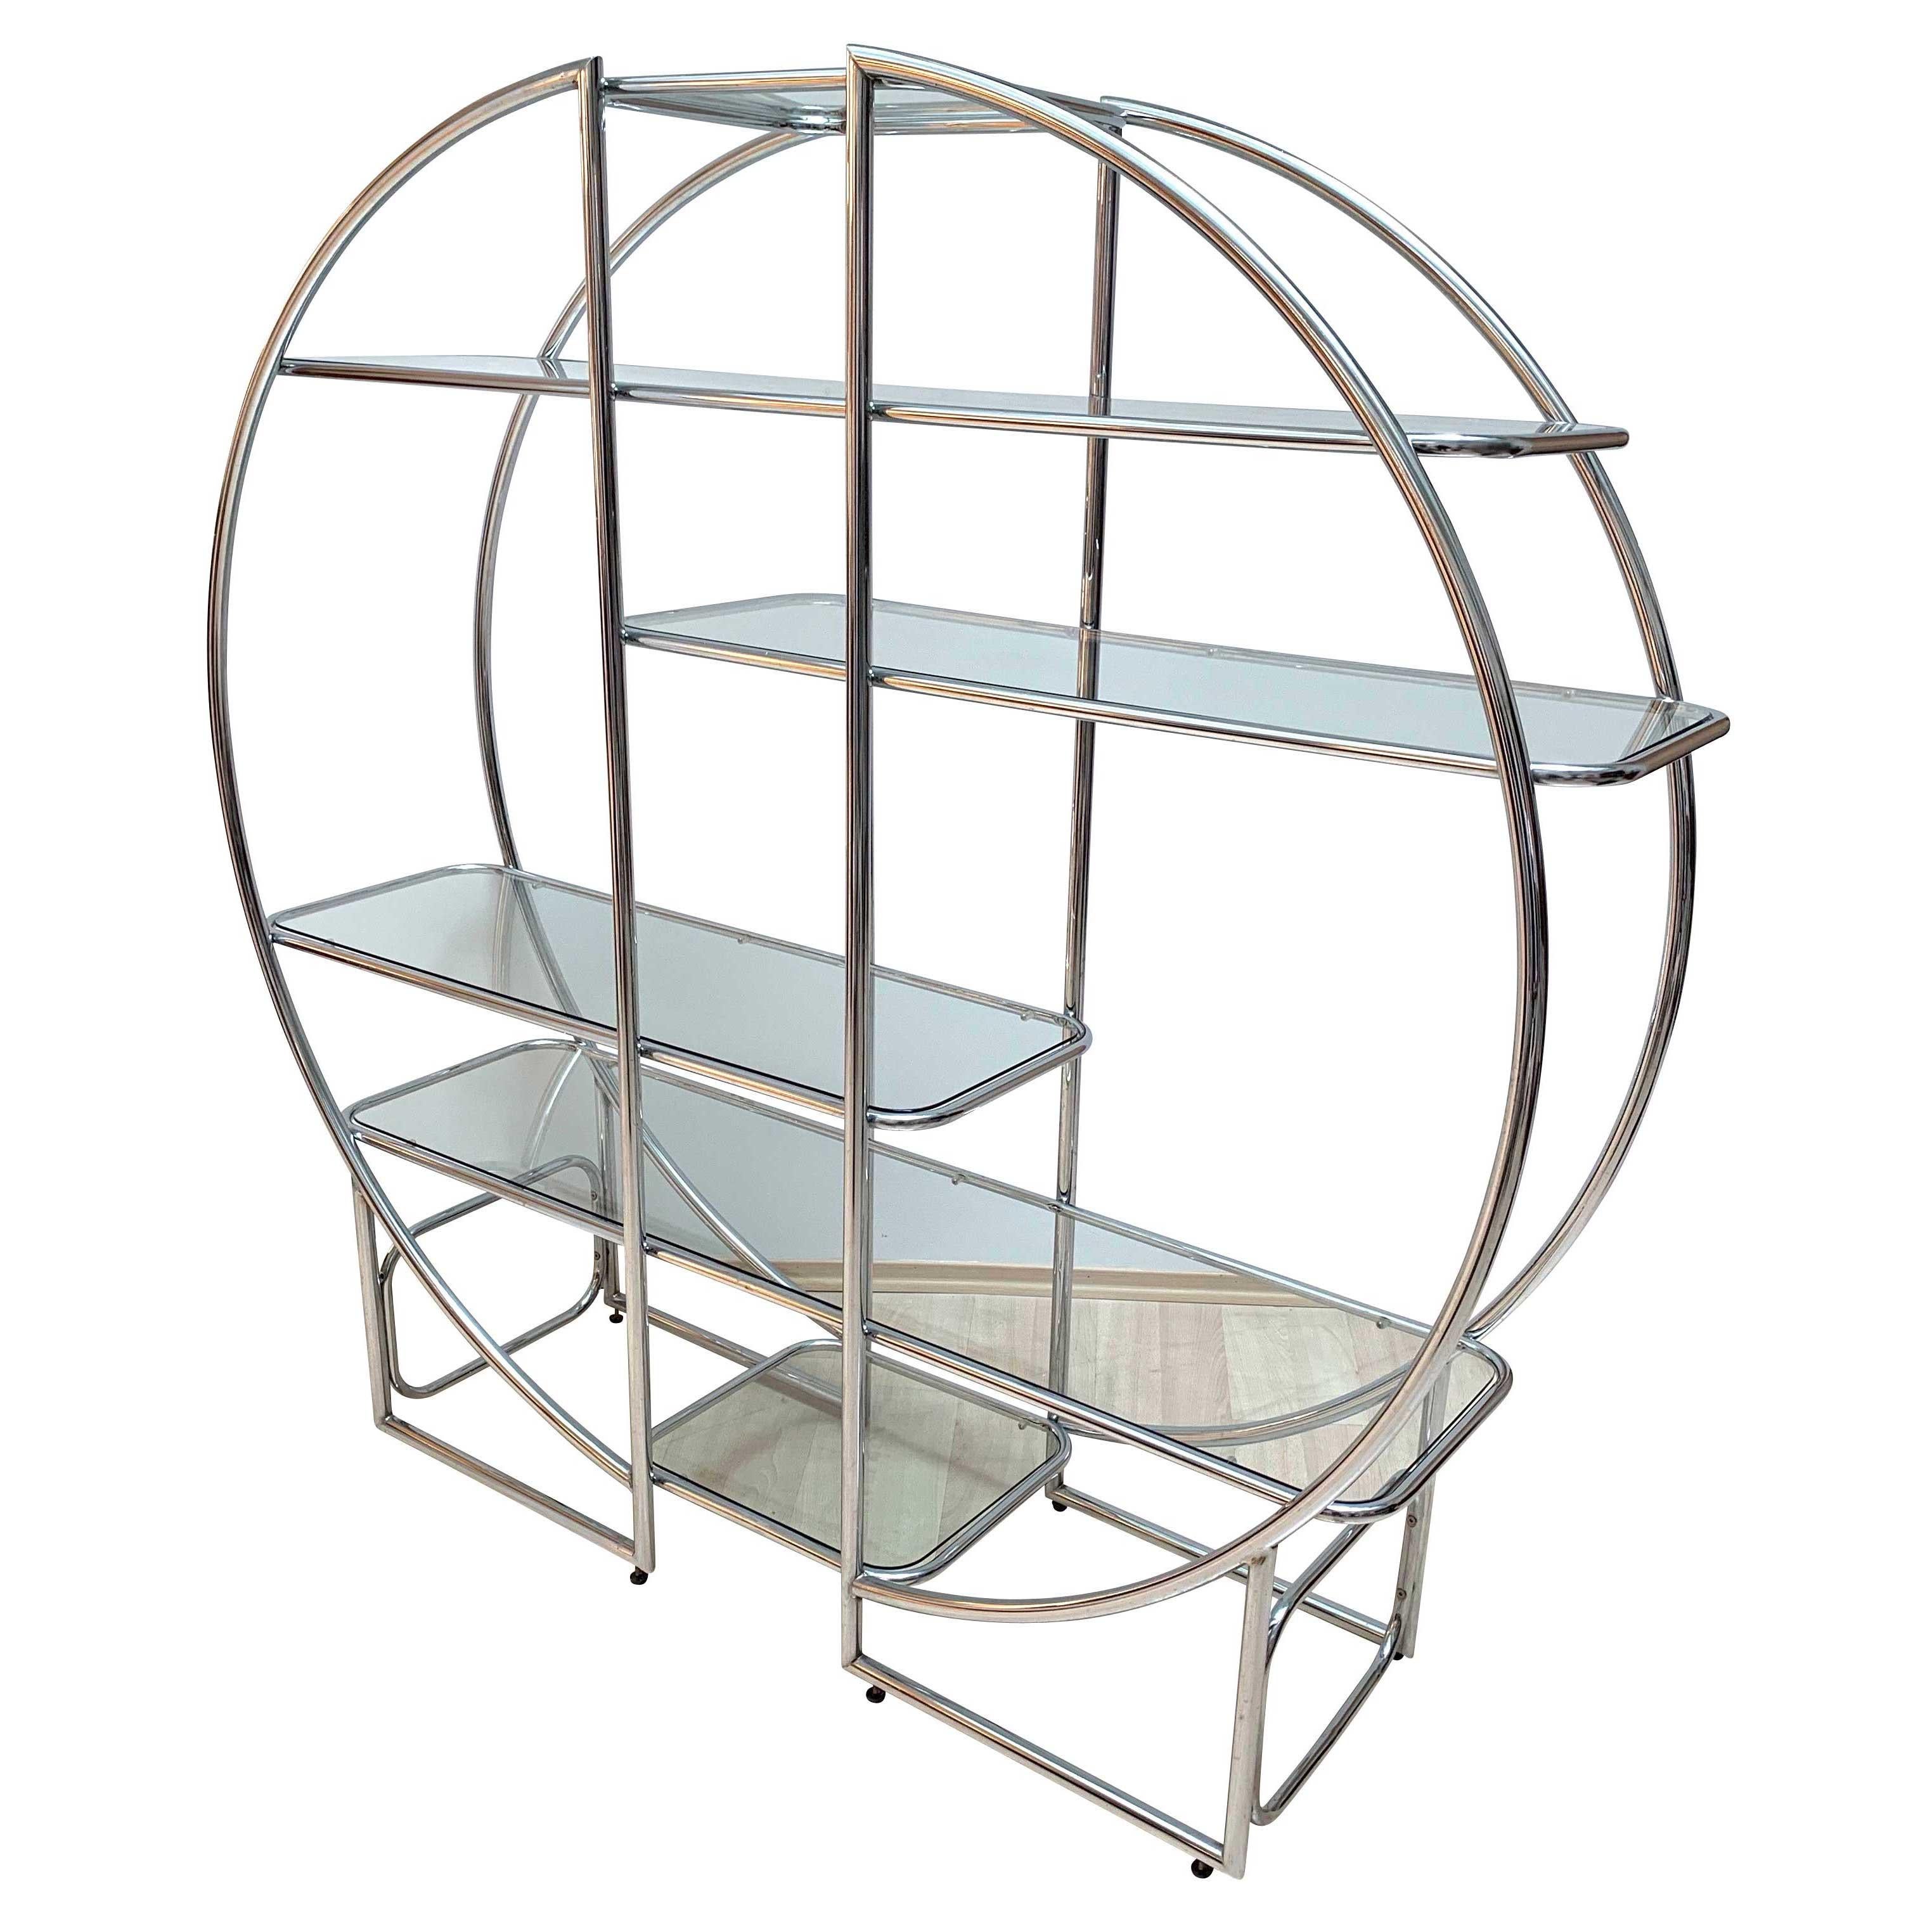 Big circular shelf / étagère in the style of Bauhaus, from Germany circa 1950s (original Design: 1930s)

Galvanized (chromed) Steeltubes, Good condition, over-polished in the refinishing process.
6 original old glass plates, can be taken out, lie